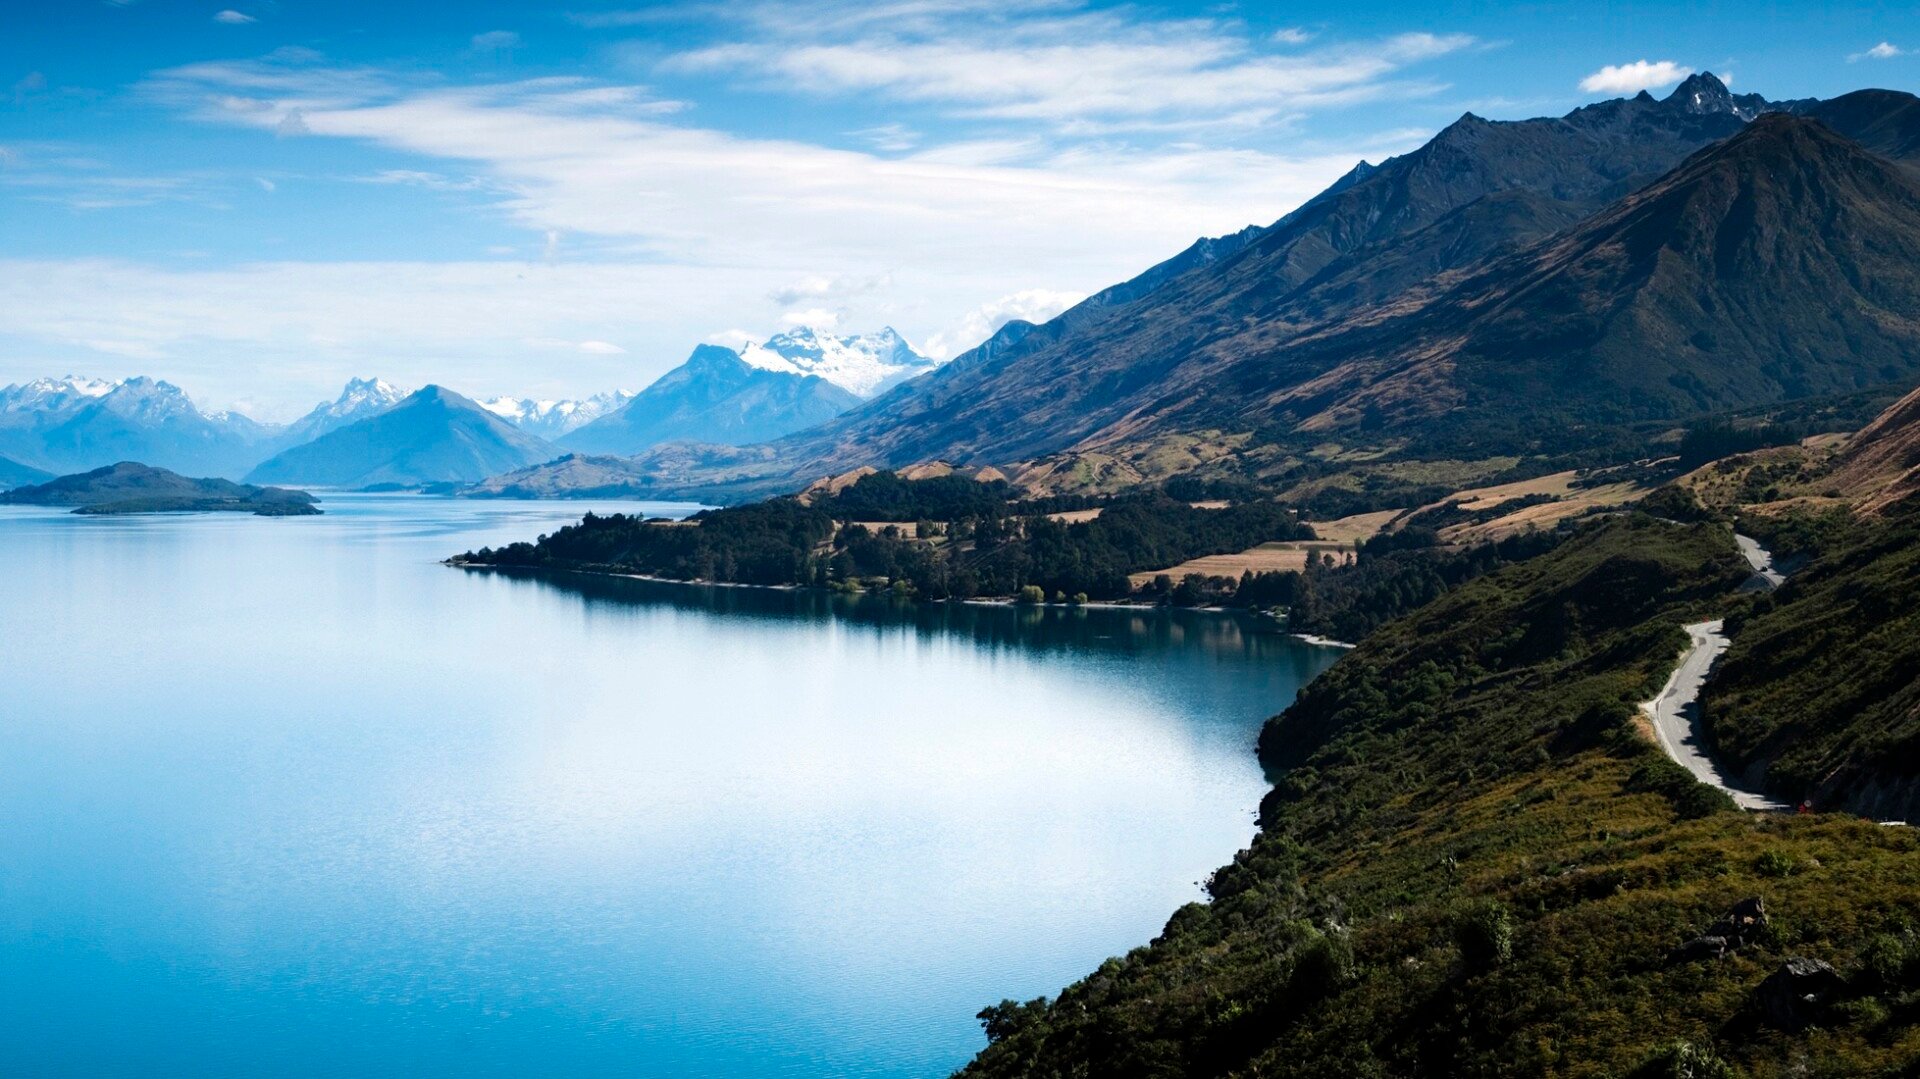 Finish this tour at Lake Wakatipu (Queenstown),  hang out or enjoy the many activities.